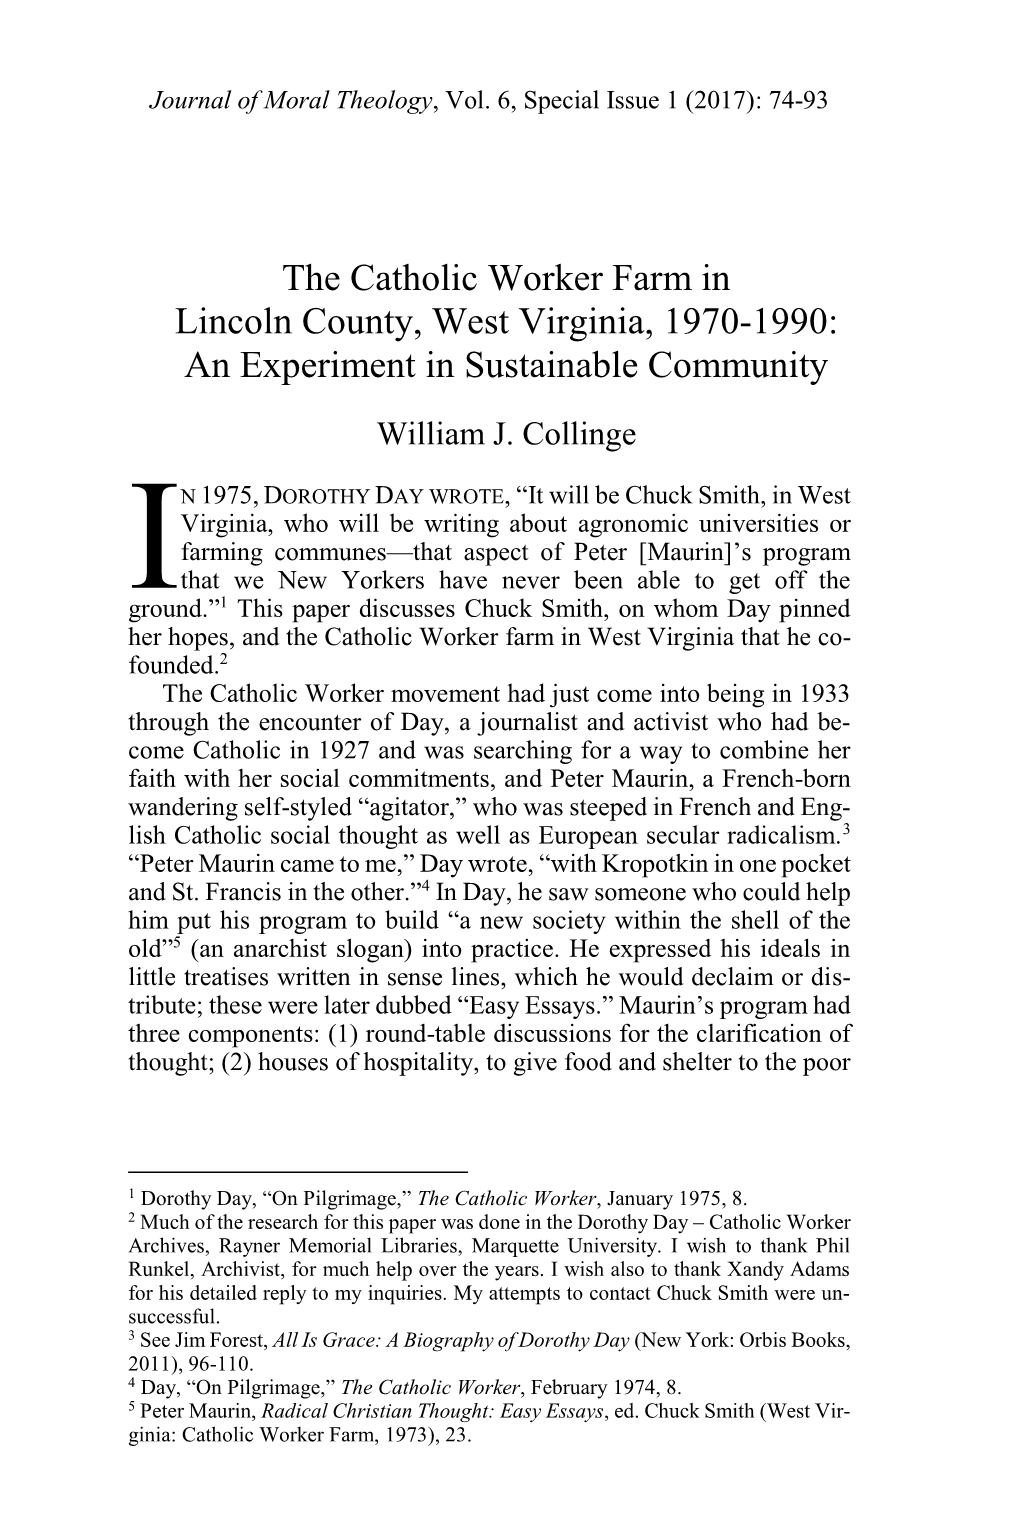 The Catholic Worker Farm in Lincoln County, West Virginia, 1970-1990: an Experiment in Sustainable Community